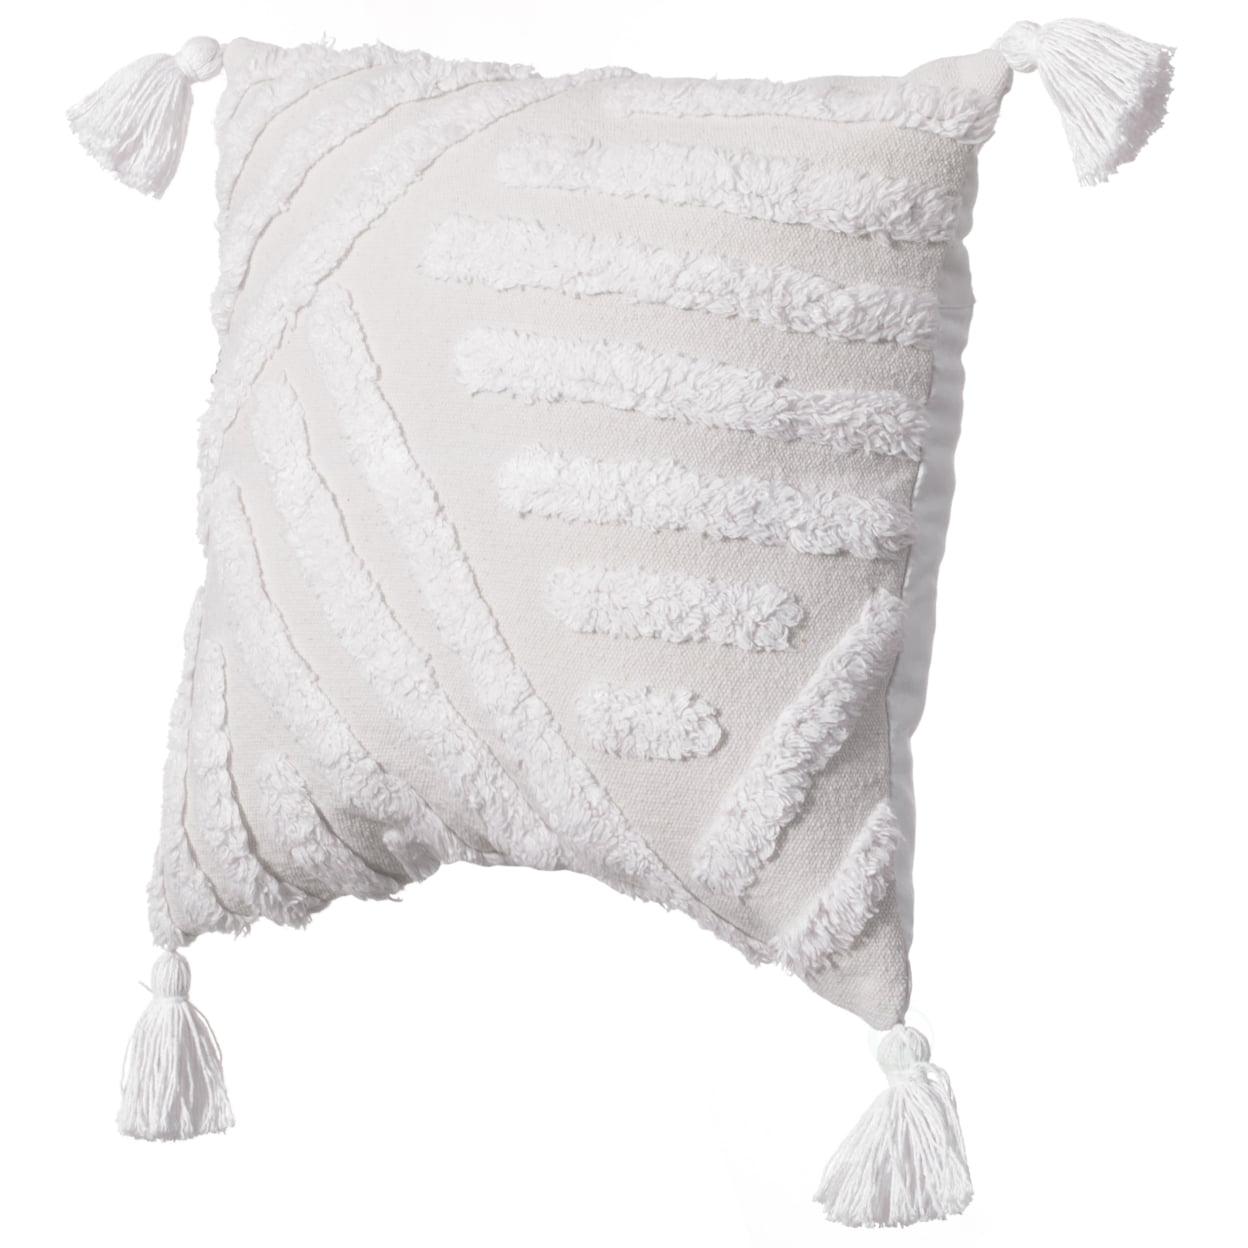 Bohemian 16" White Tufted Cotton Throw Pillow with Tassel Accents